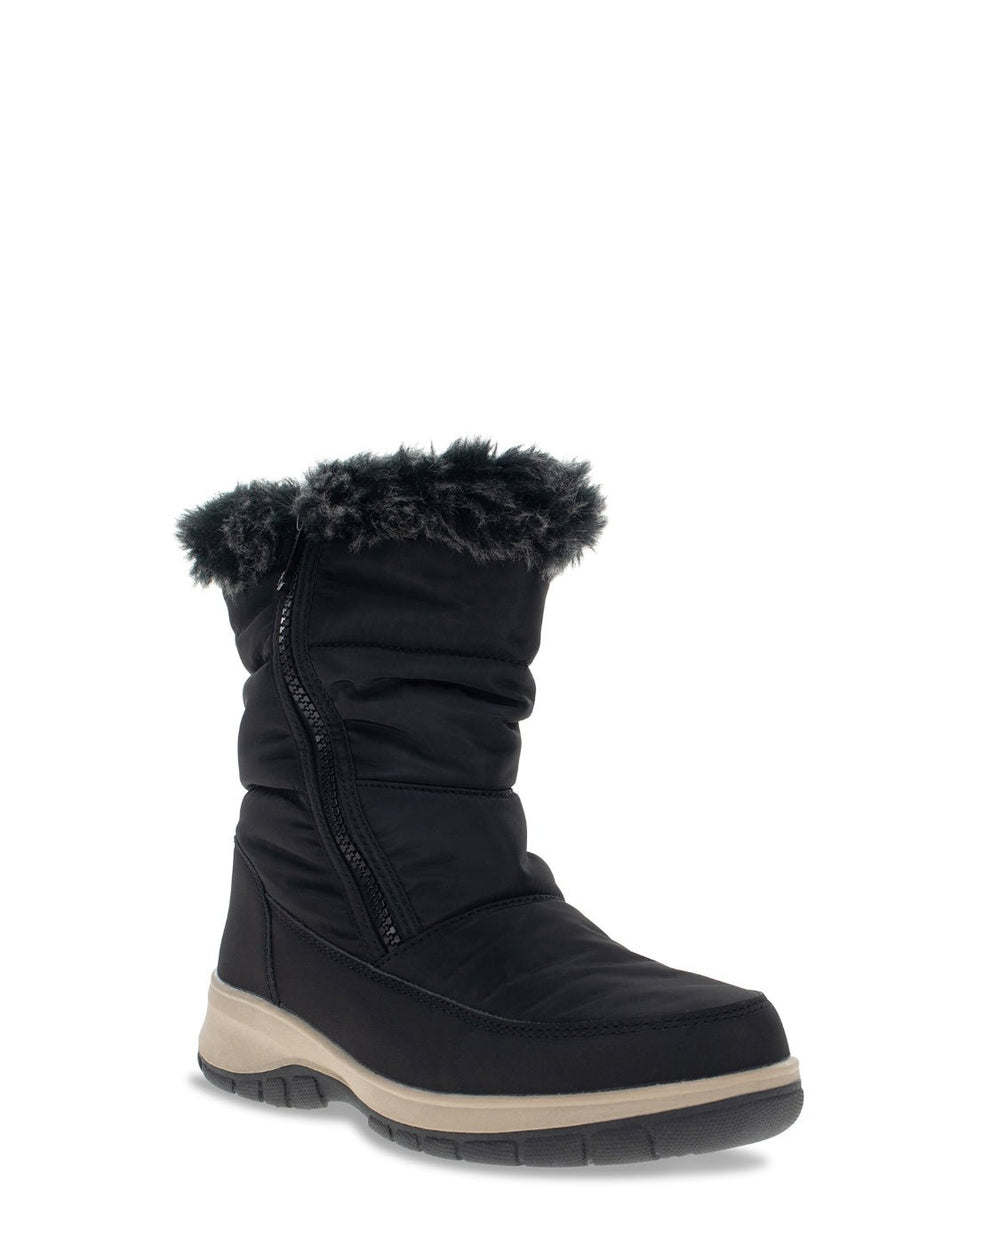 Women's Pine Cold Weather Boot - Black - Western Chief